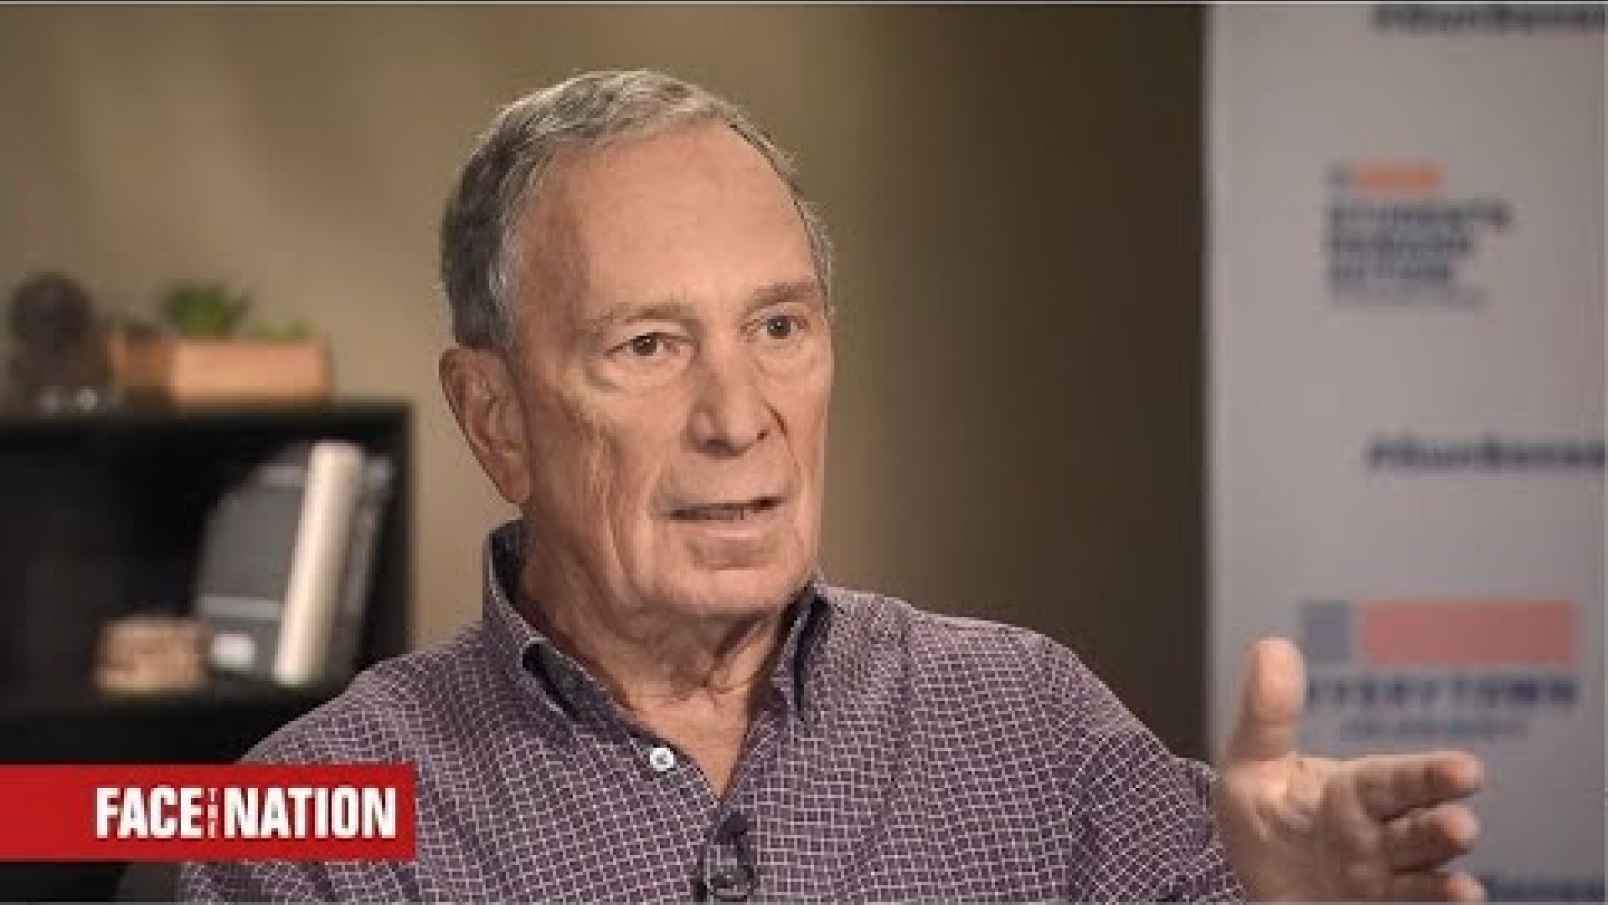 Bloomberg Tries to Take Credit for Impeaching Trump - Blunt Force Truth4 日前